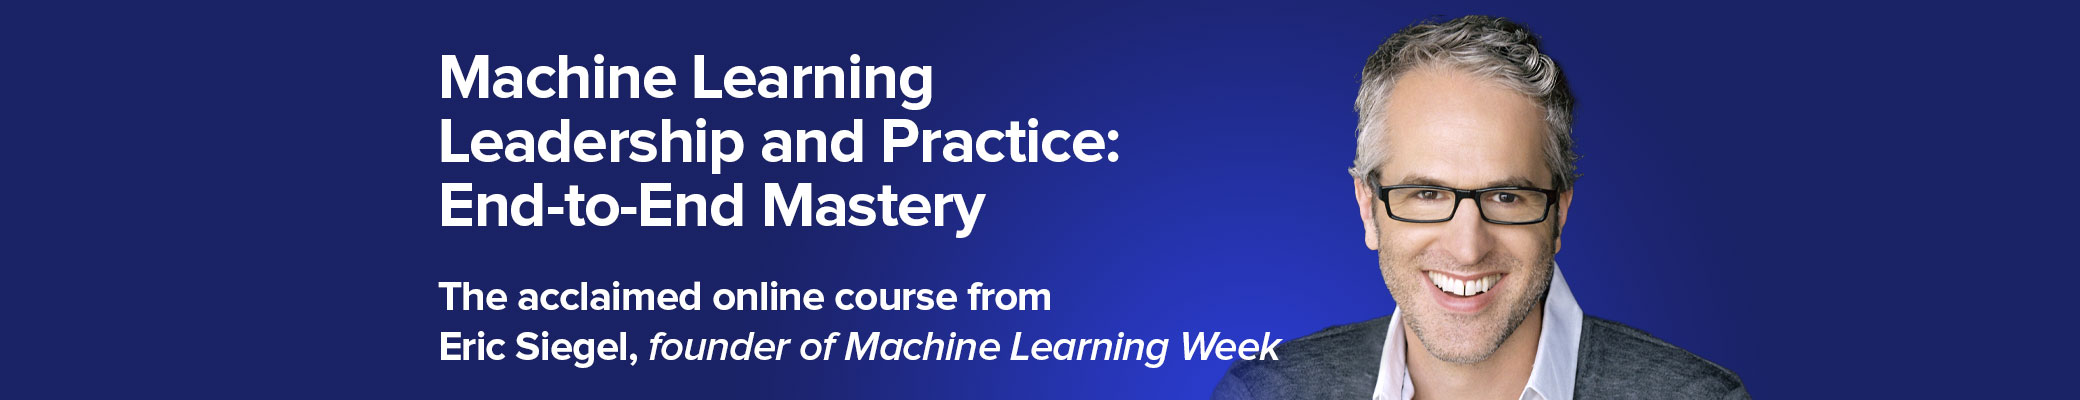 Online workshop – Machine Learning Leadership and Practice: End-to-End Mastery